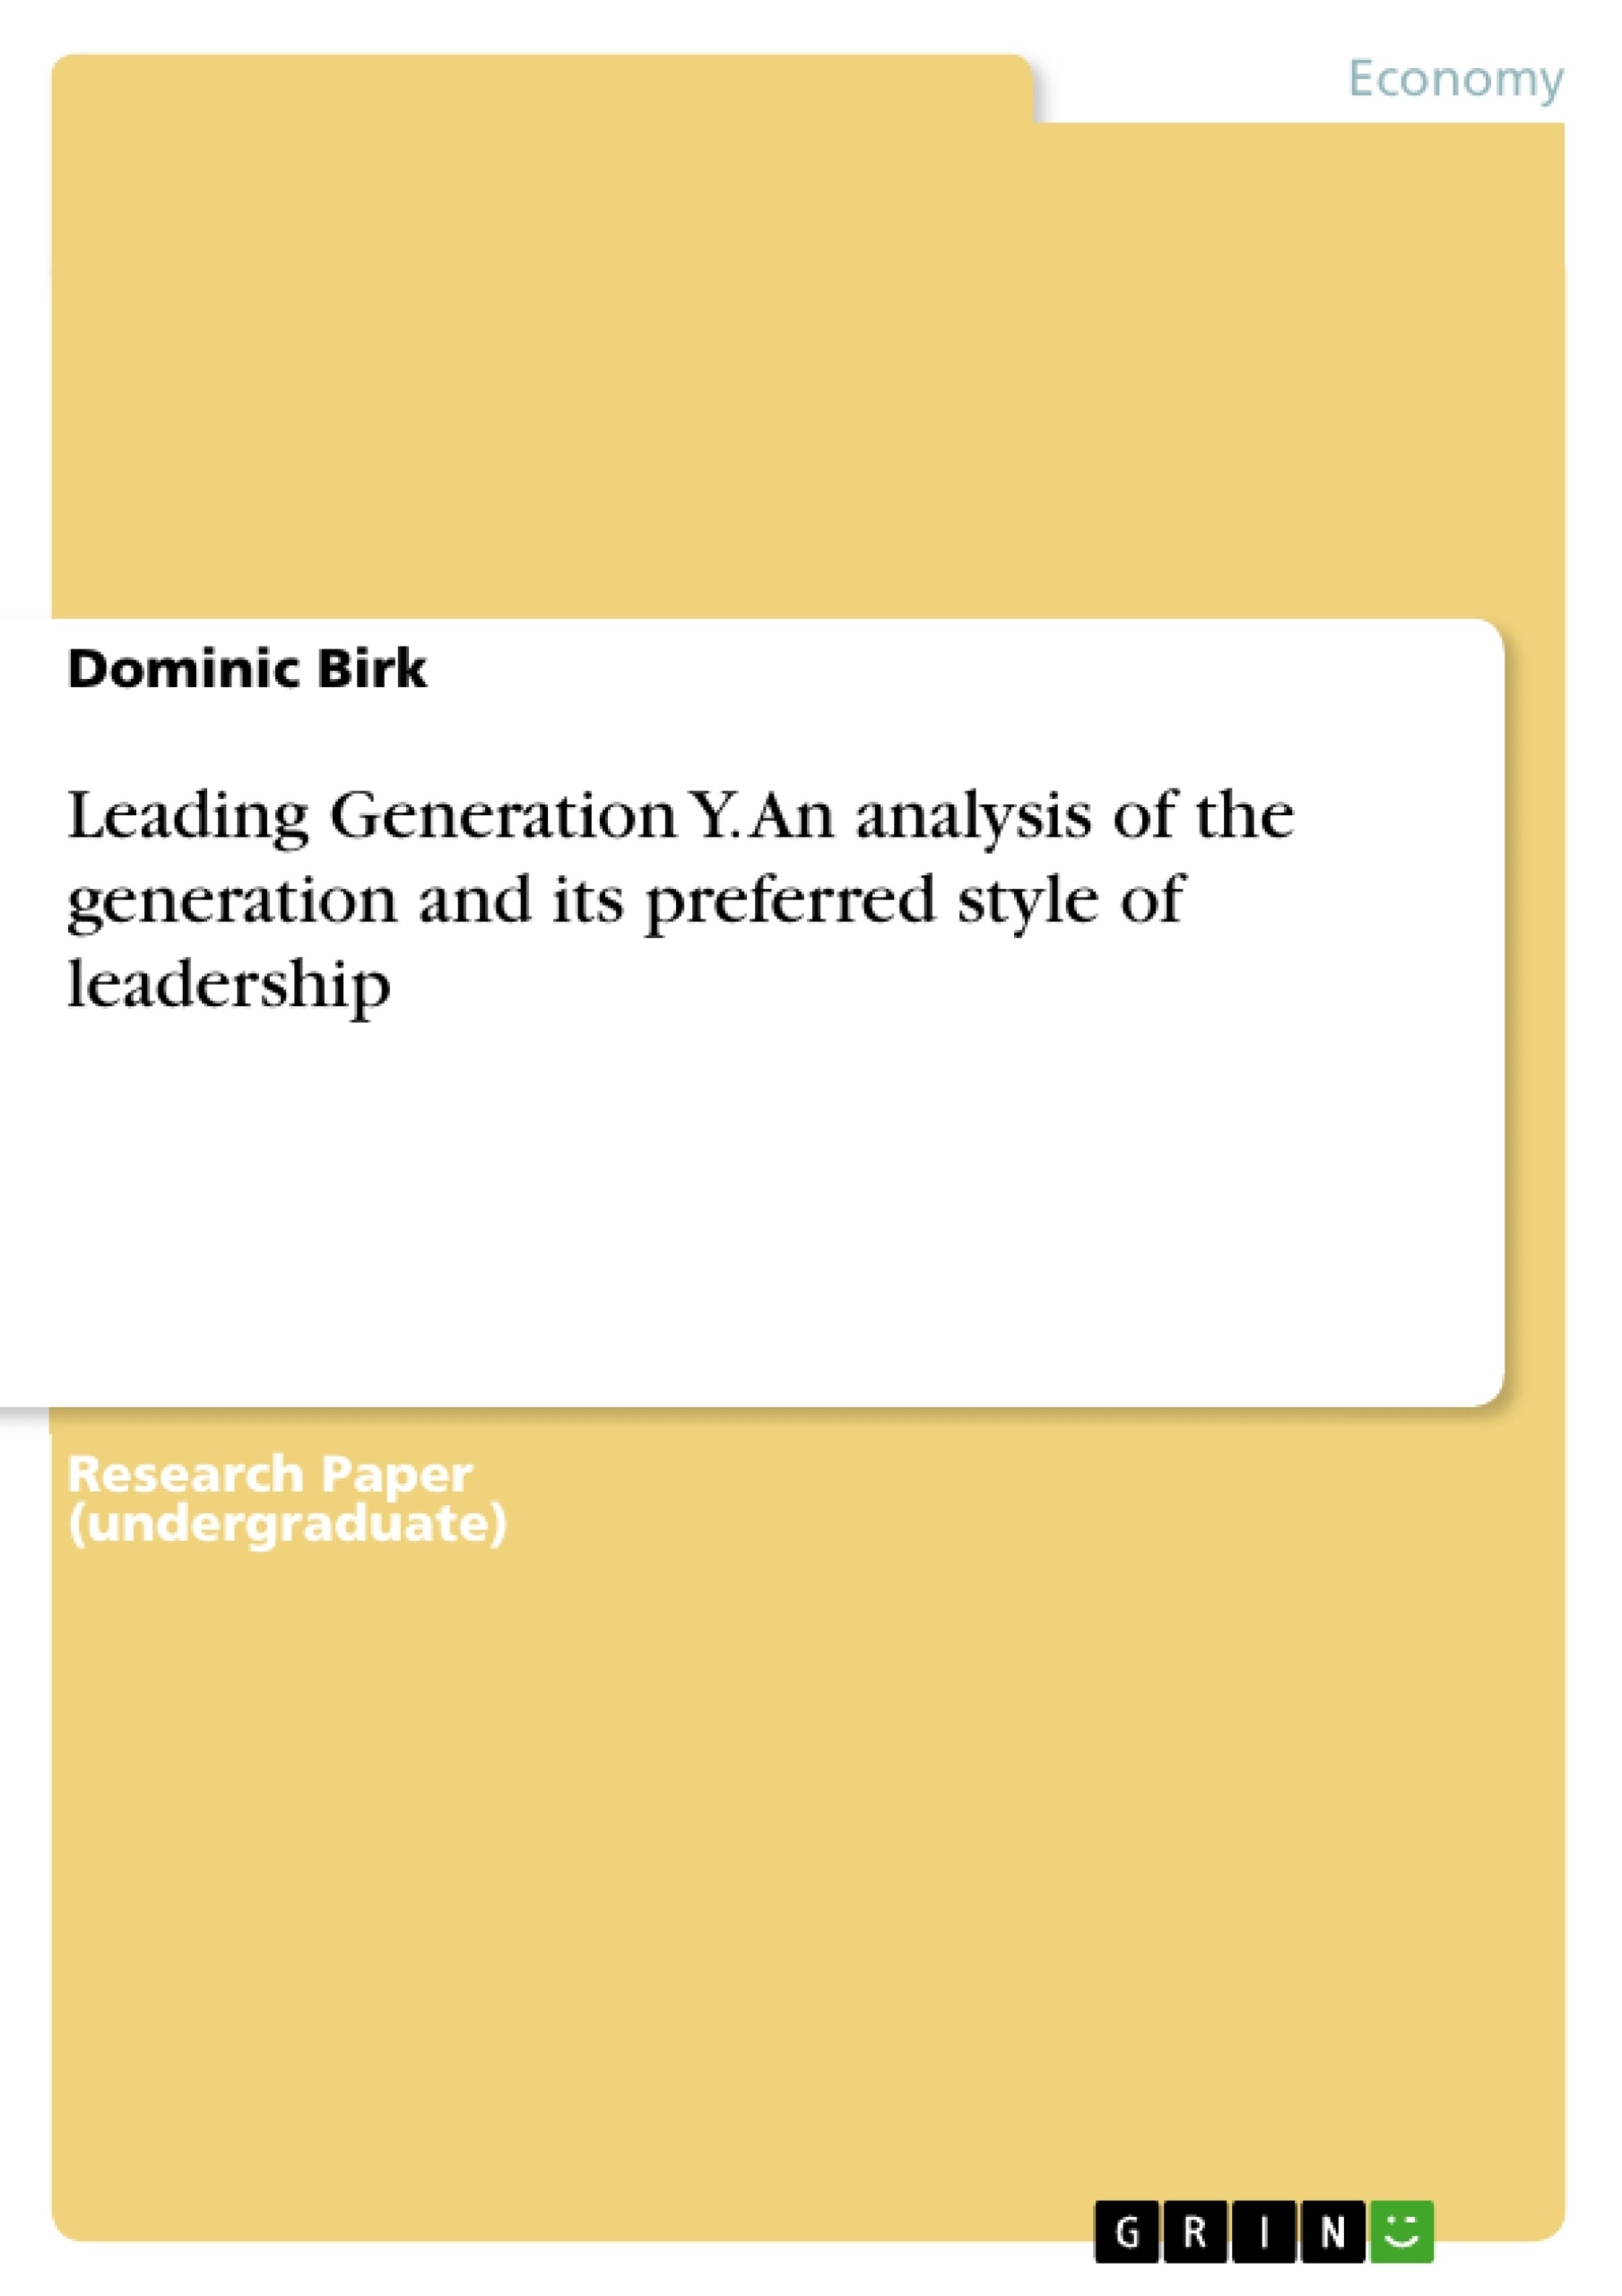 Título: Leading Generation Y. An analysis of the generation and its preferred style of leadership